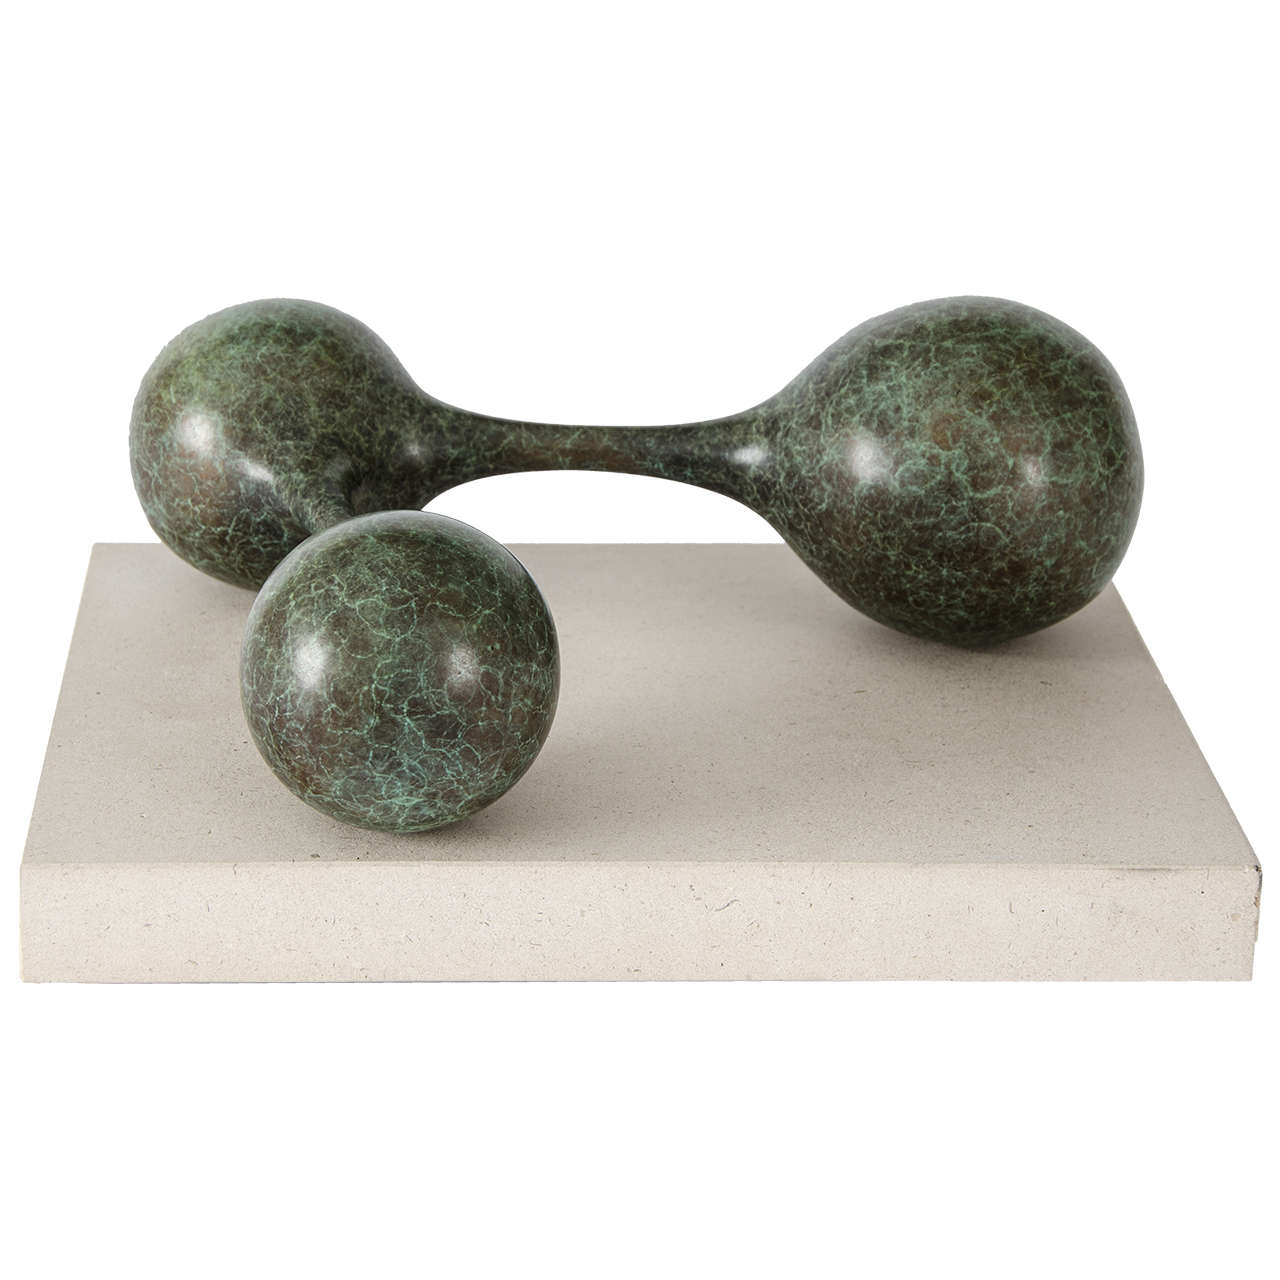 'Wishbone' is a limited-edition (3 + 2AP) bronze sculpture on a limestone base by the British artist Vivienne Foley.
The first piece has sold from the edition but there are two pieces available.

Vivienne Foley’s bronze sculptures are a recent